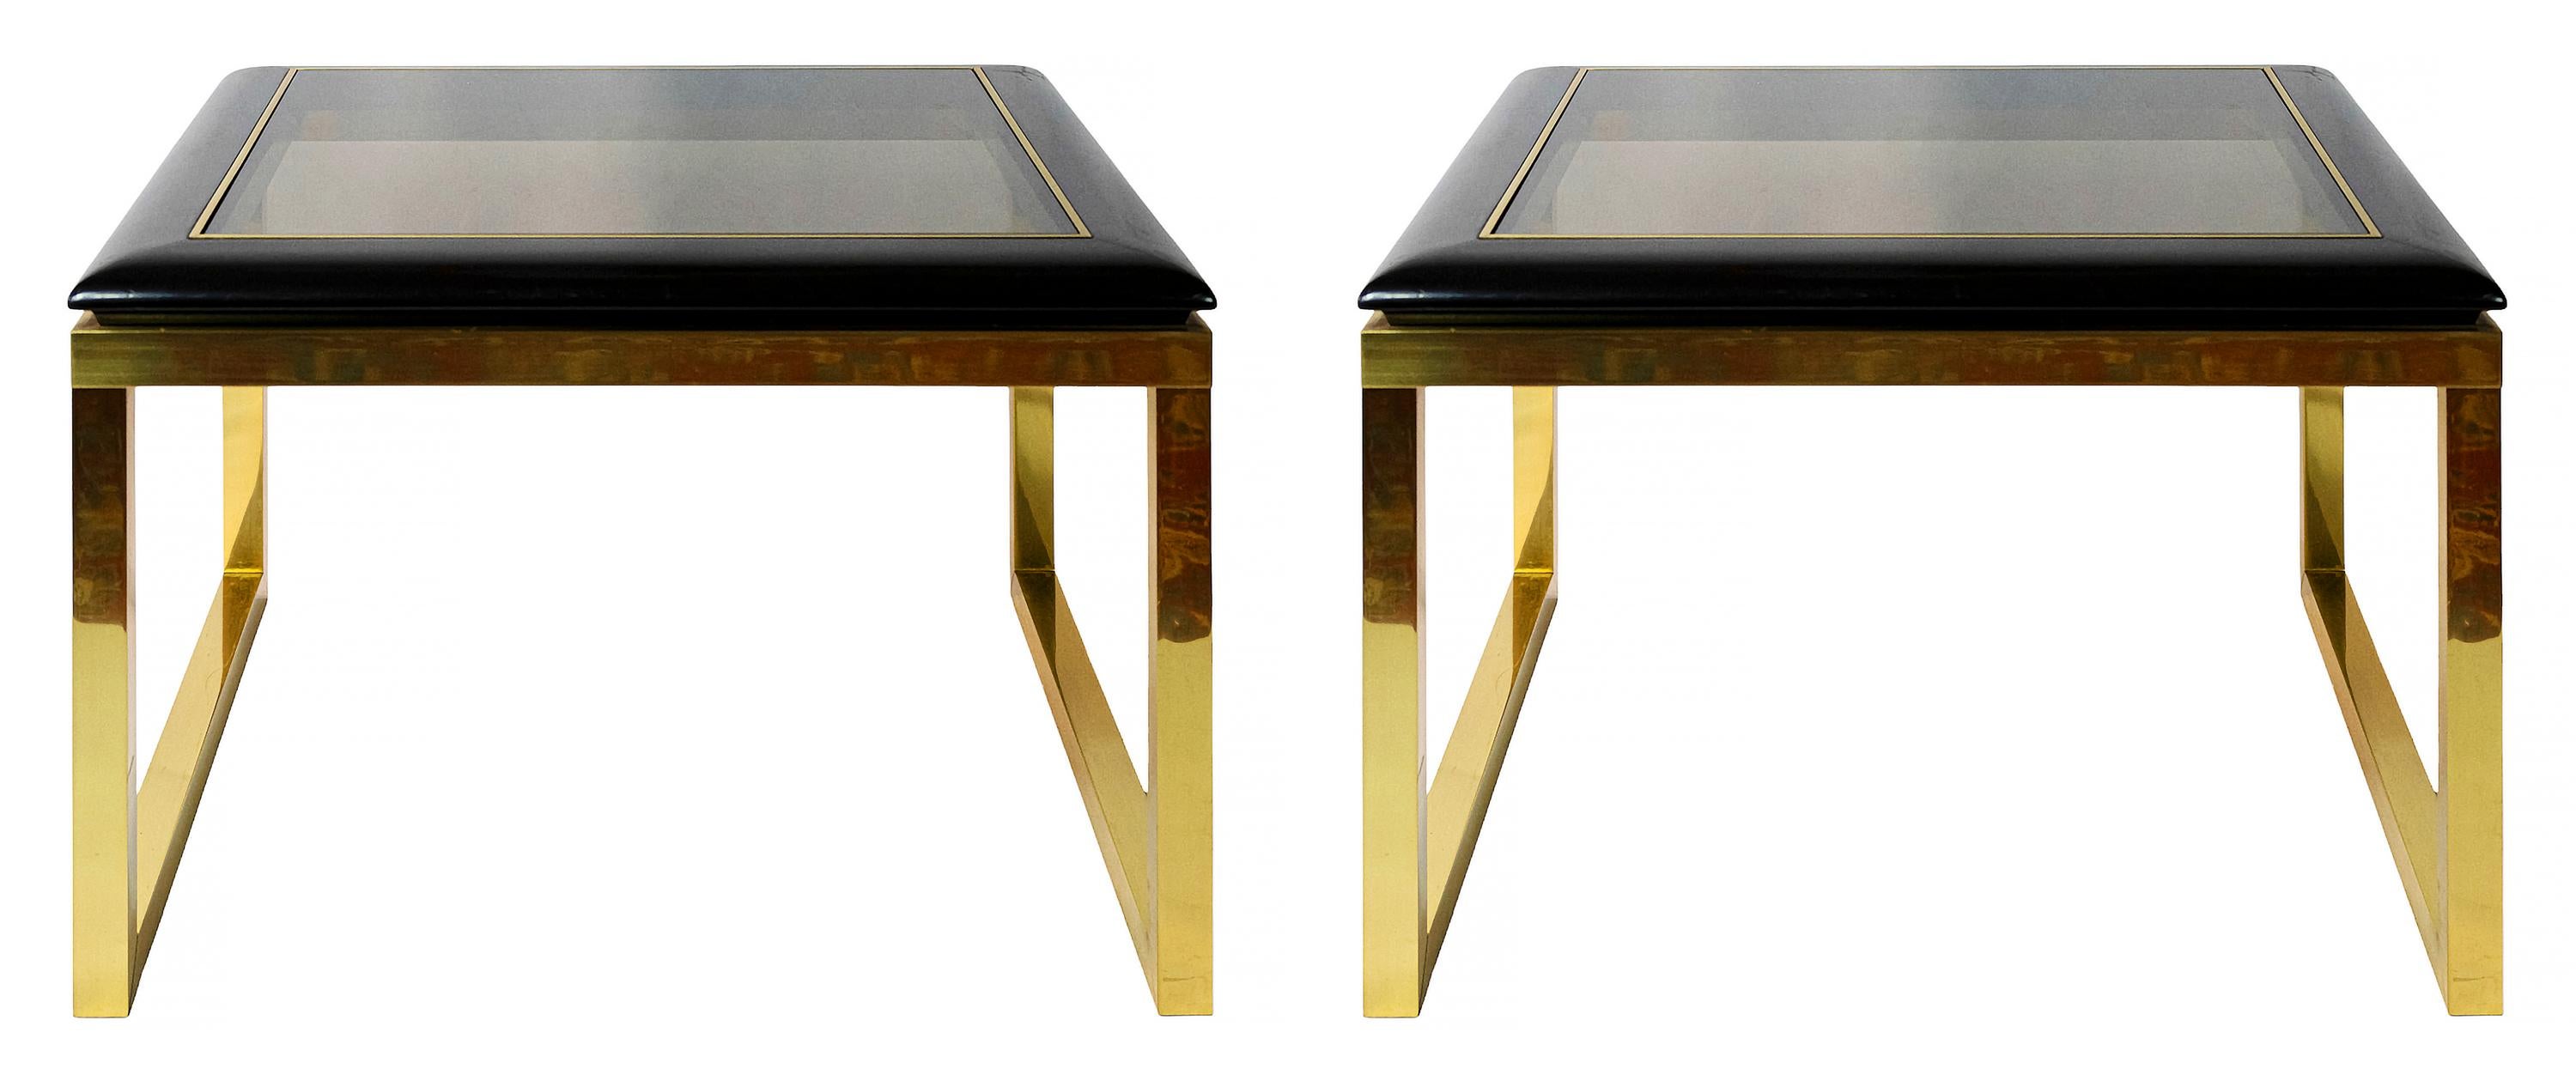 Pair of mid-century French side/sofa tables in brass and black color wooden frame top with smoked glass inside.
Very good vintage condition.
